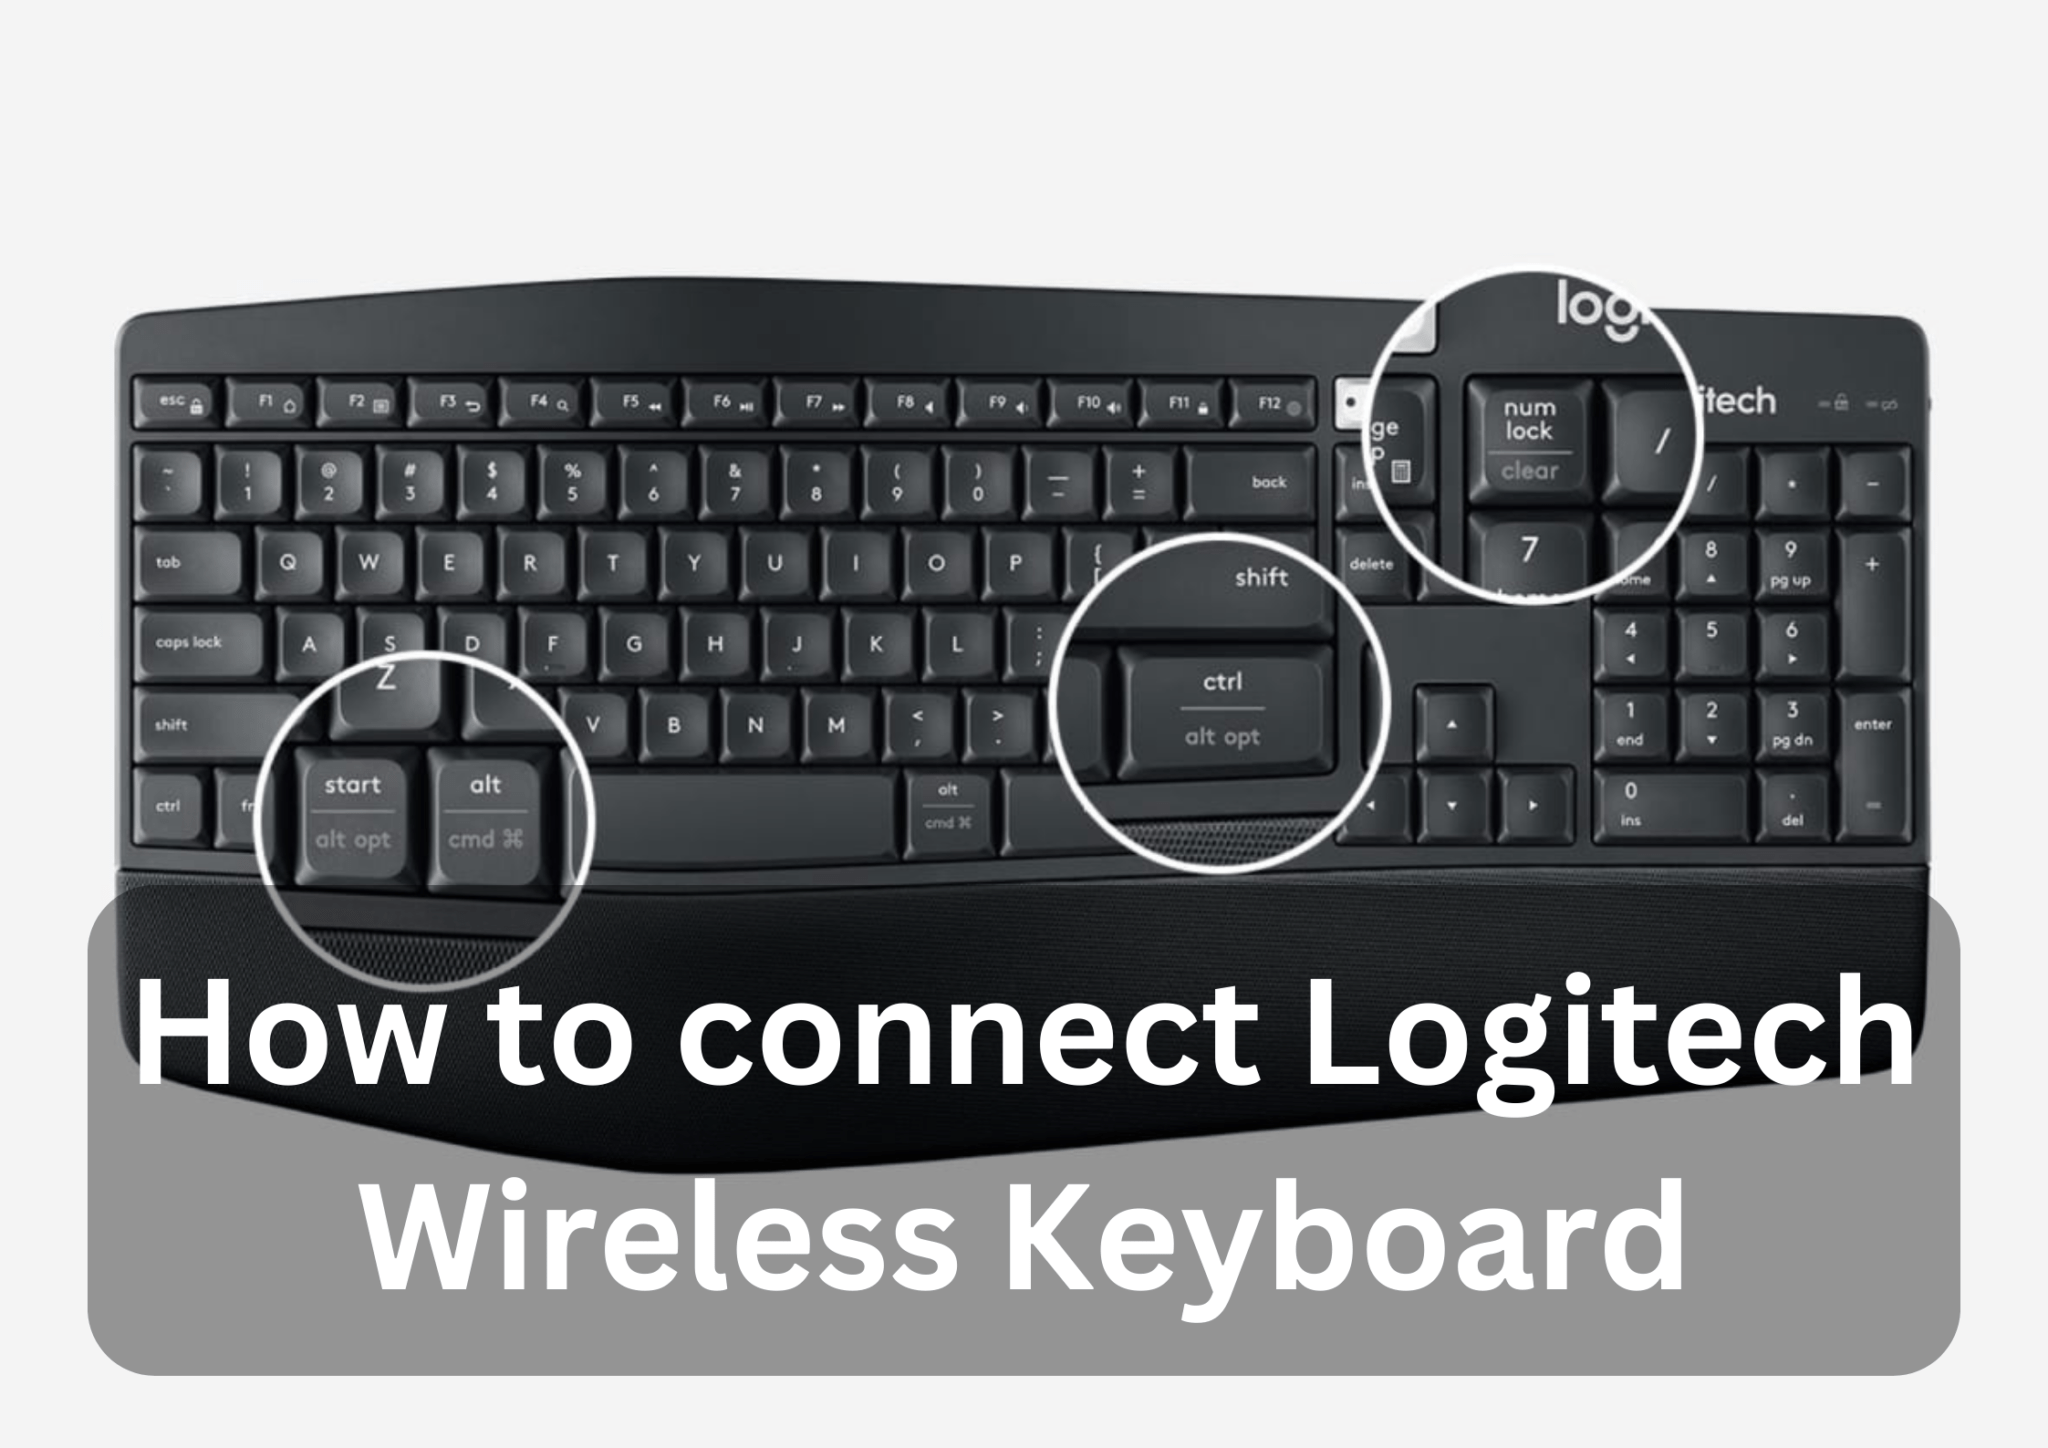 How To Connect Logitech Wireless Keyboard Effortlessly Gadget Visual 